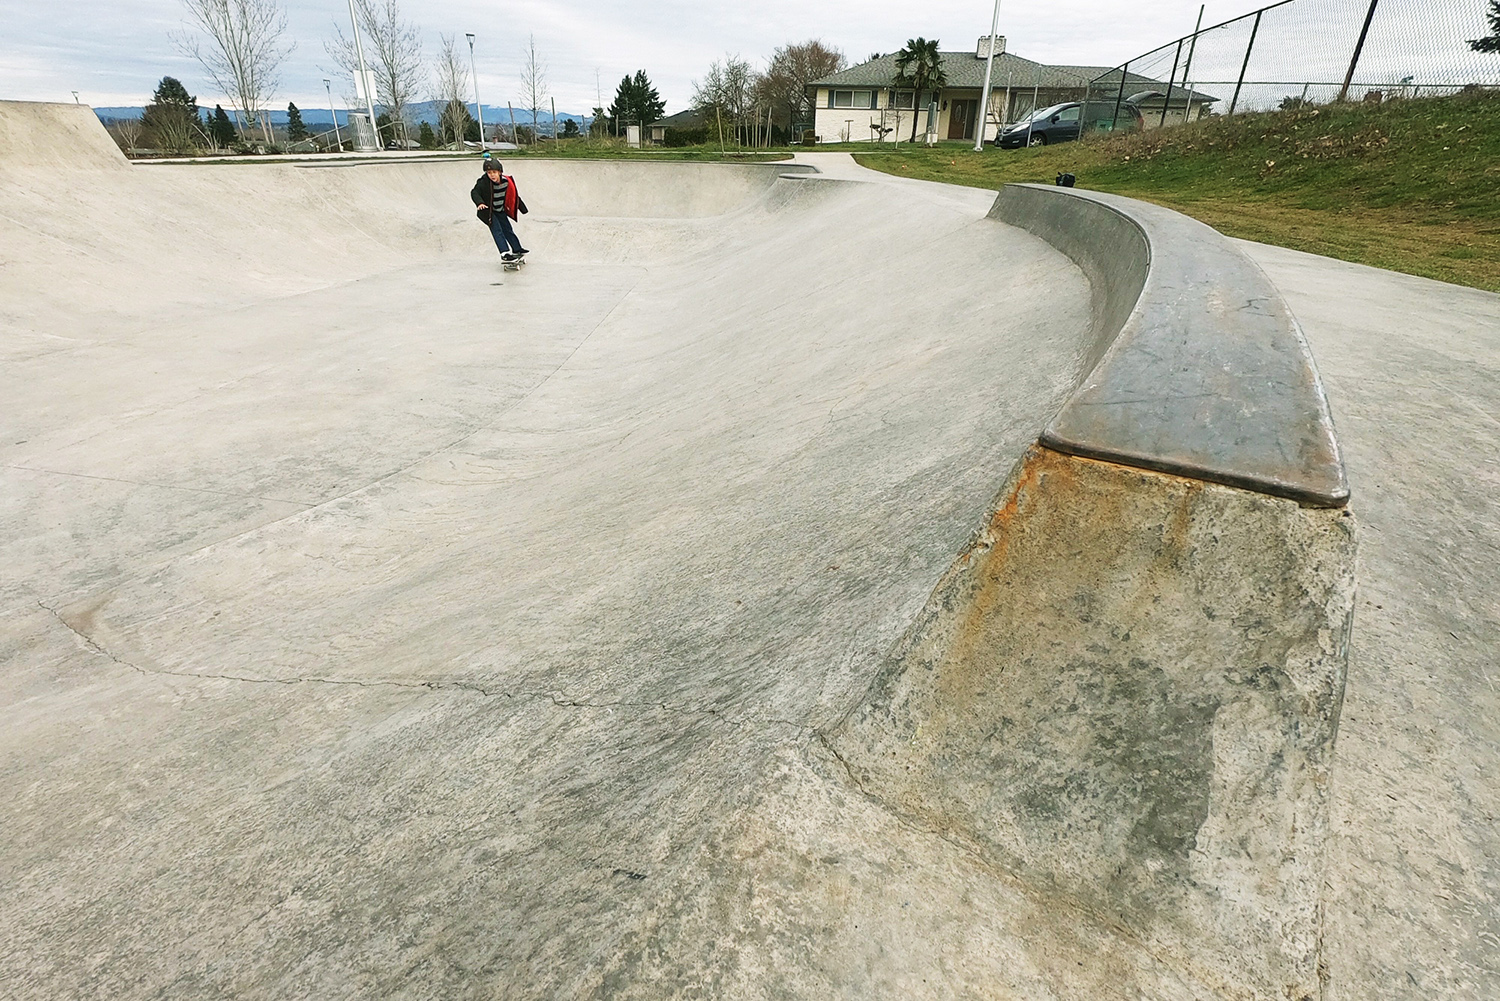  A steel capped curb feature at the Luuwit Skate Spot. 